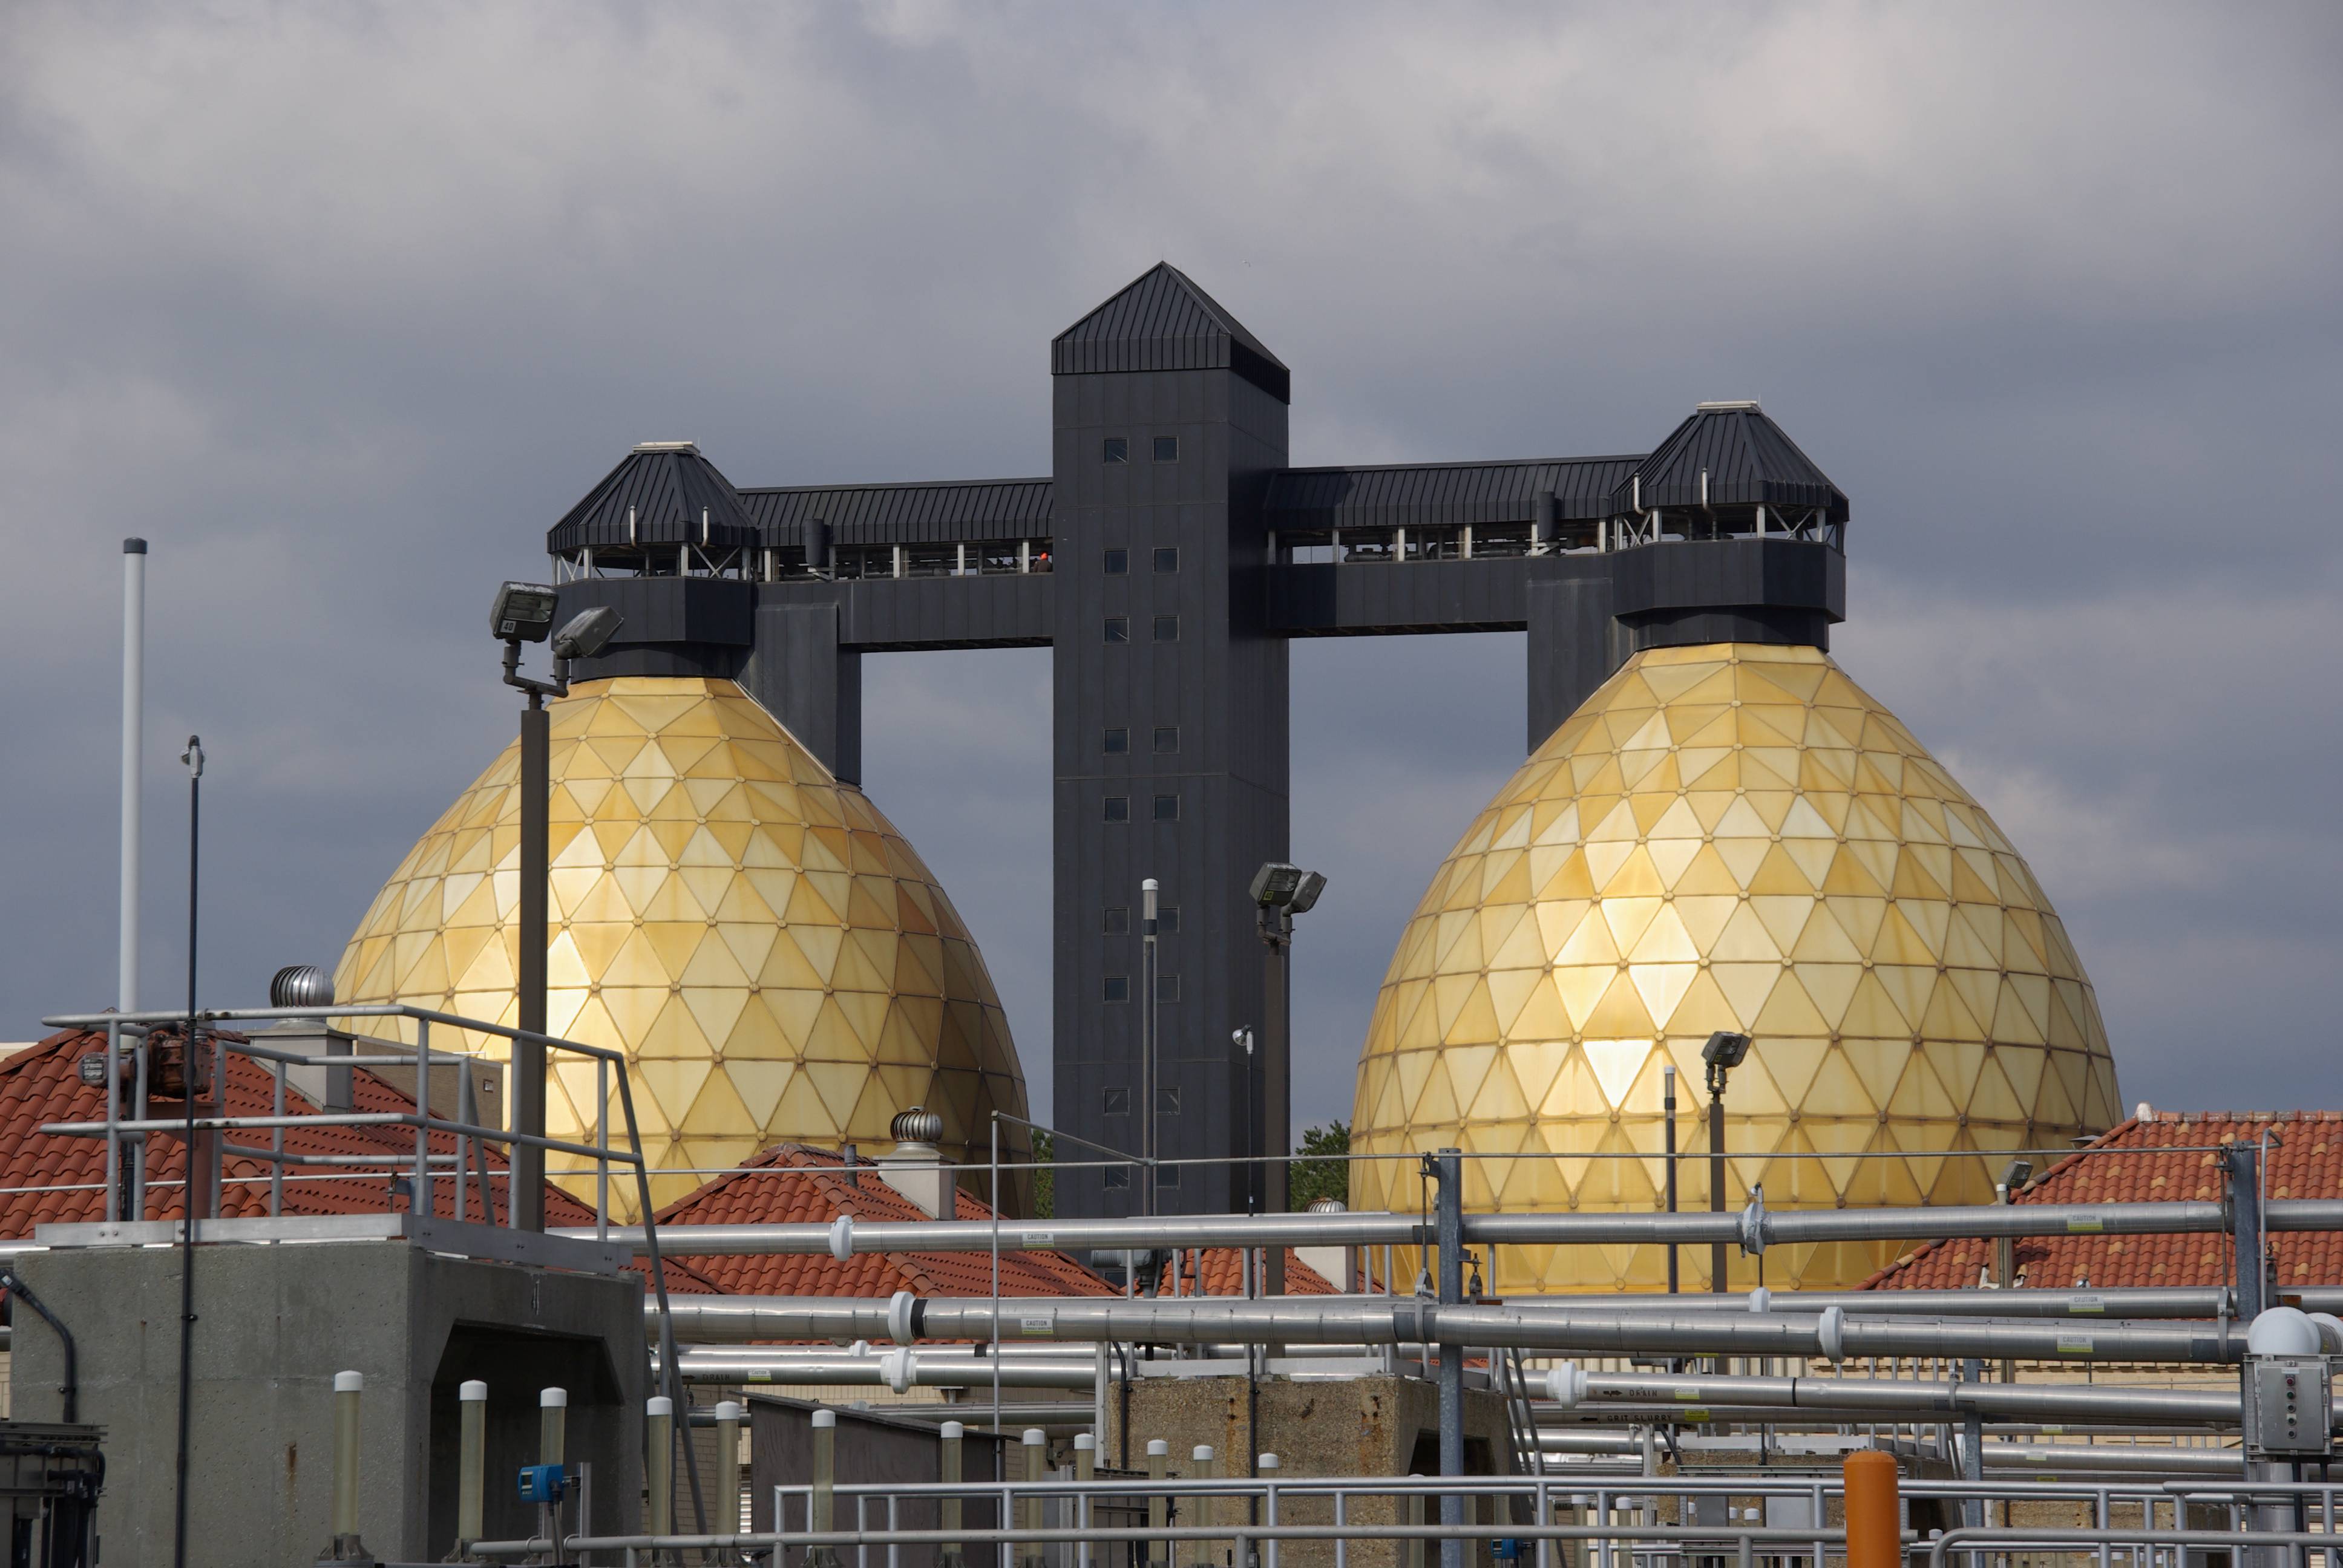 The two digesters at the Back River Wastewater Treatment Plant near Baltimore.